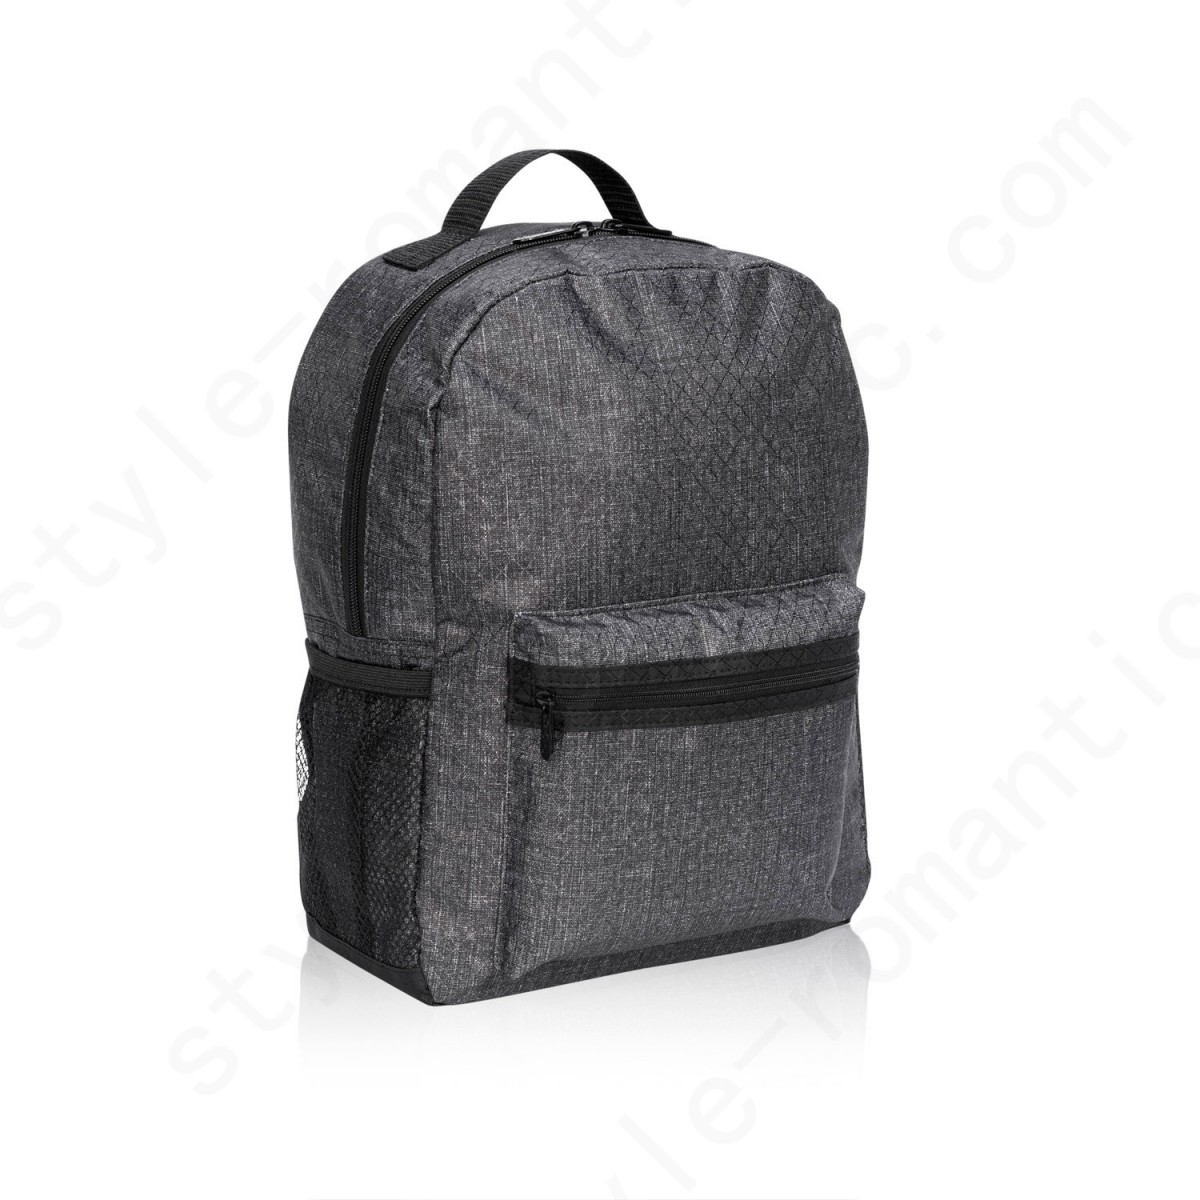 Thirty-One Gifts Lil' Go Backpack - Charcoal Crosshatch - -0